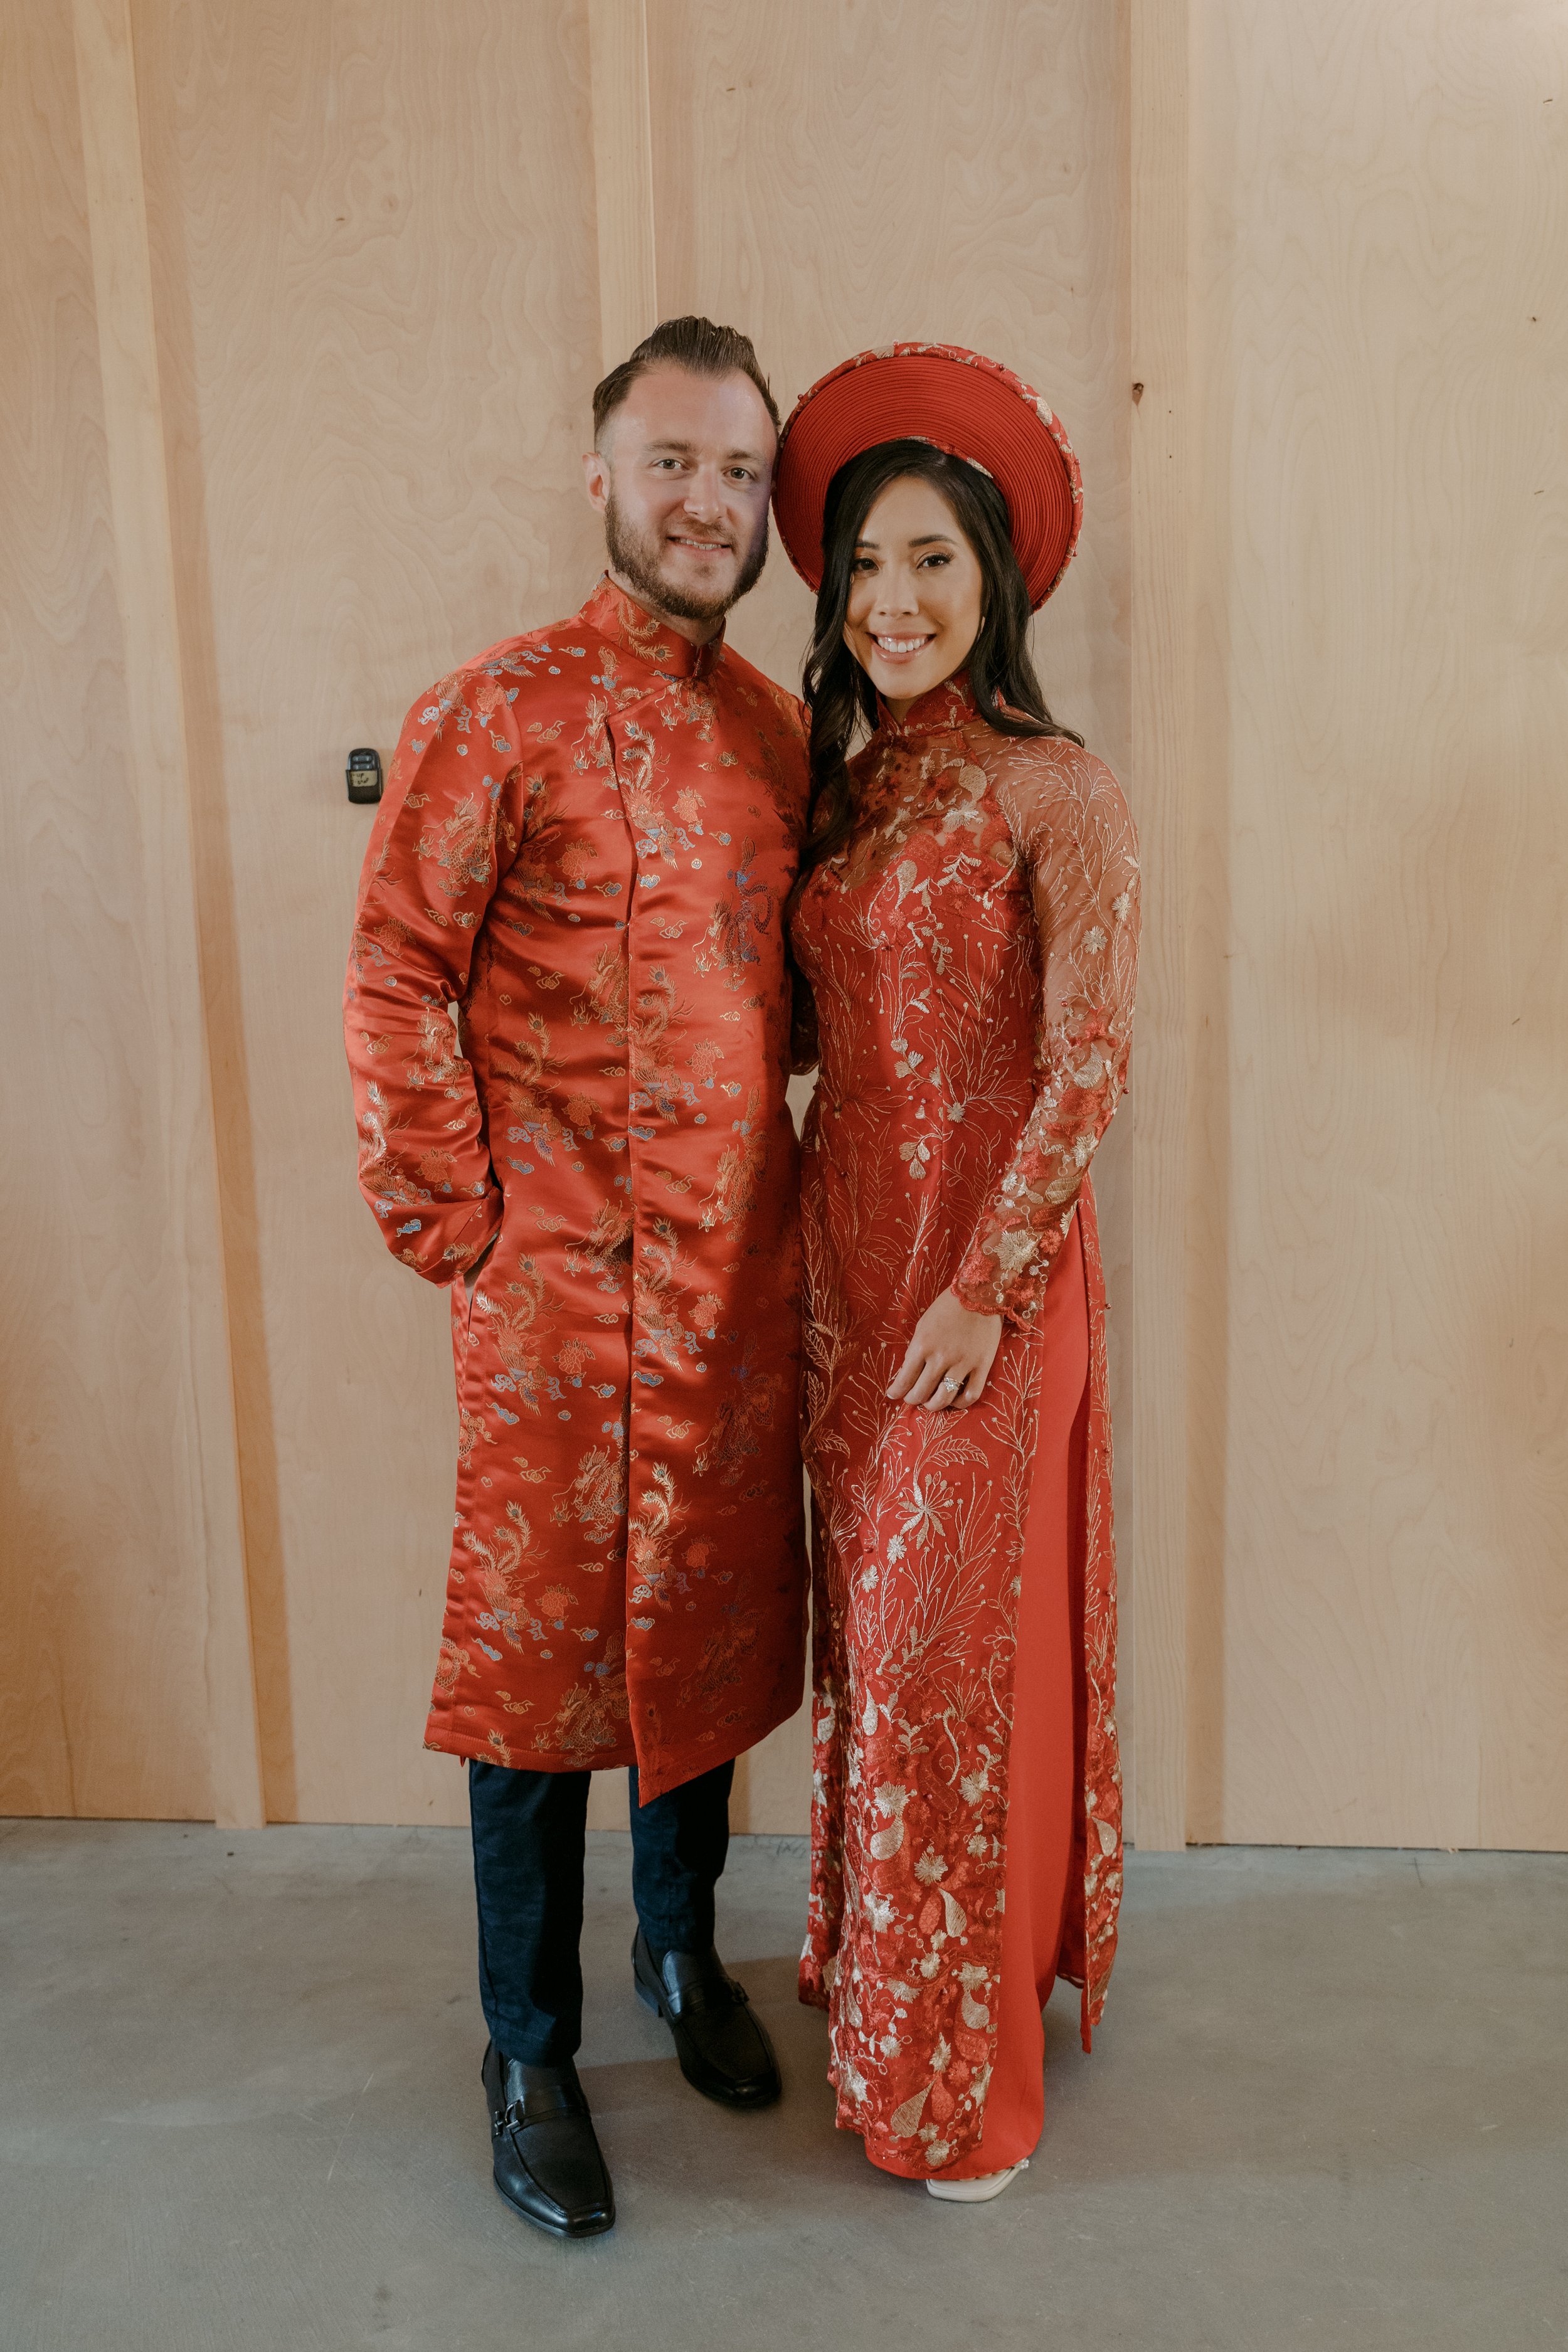  www.santabarbarawedding.com | Events by Fran | Ali Beck | Ecomama Farms | Jackie Romero | Bride and Groom in Traditional Vietnamese Clothing